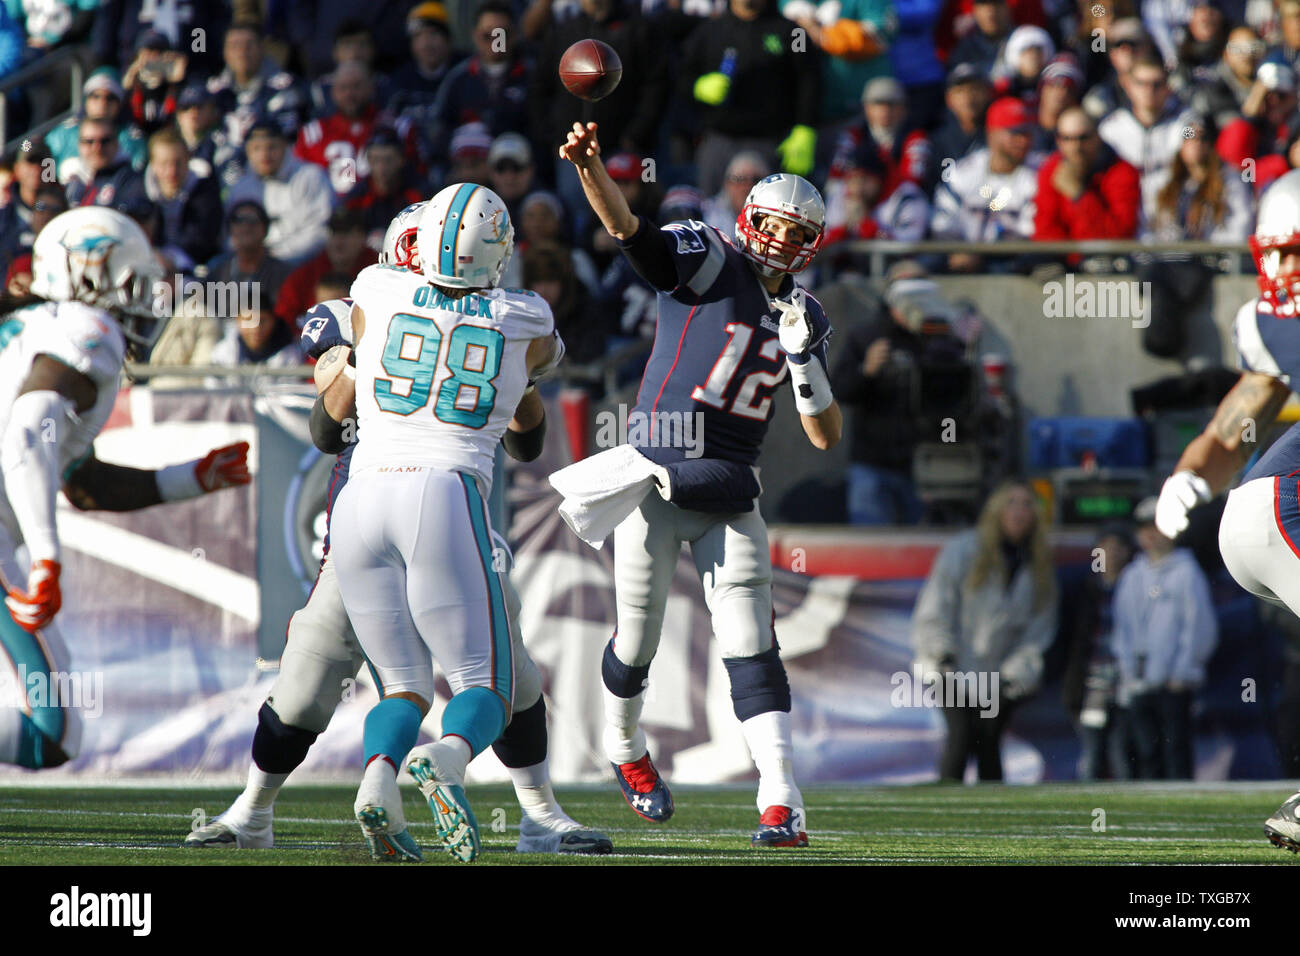 New England Patriots quarterback Tom Brady (12) throws a pass in the first quarter against the Miami Dolphins at Gillette Stadium in Foxborough, Massachusetts on December 14, 2014.   UPI/Matthew Healey Stock Photo